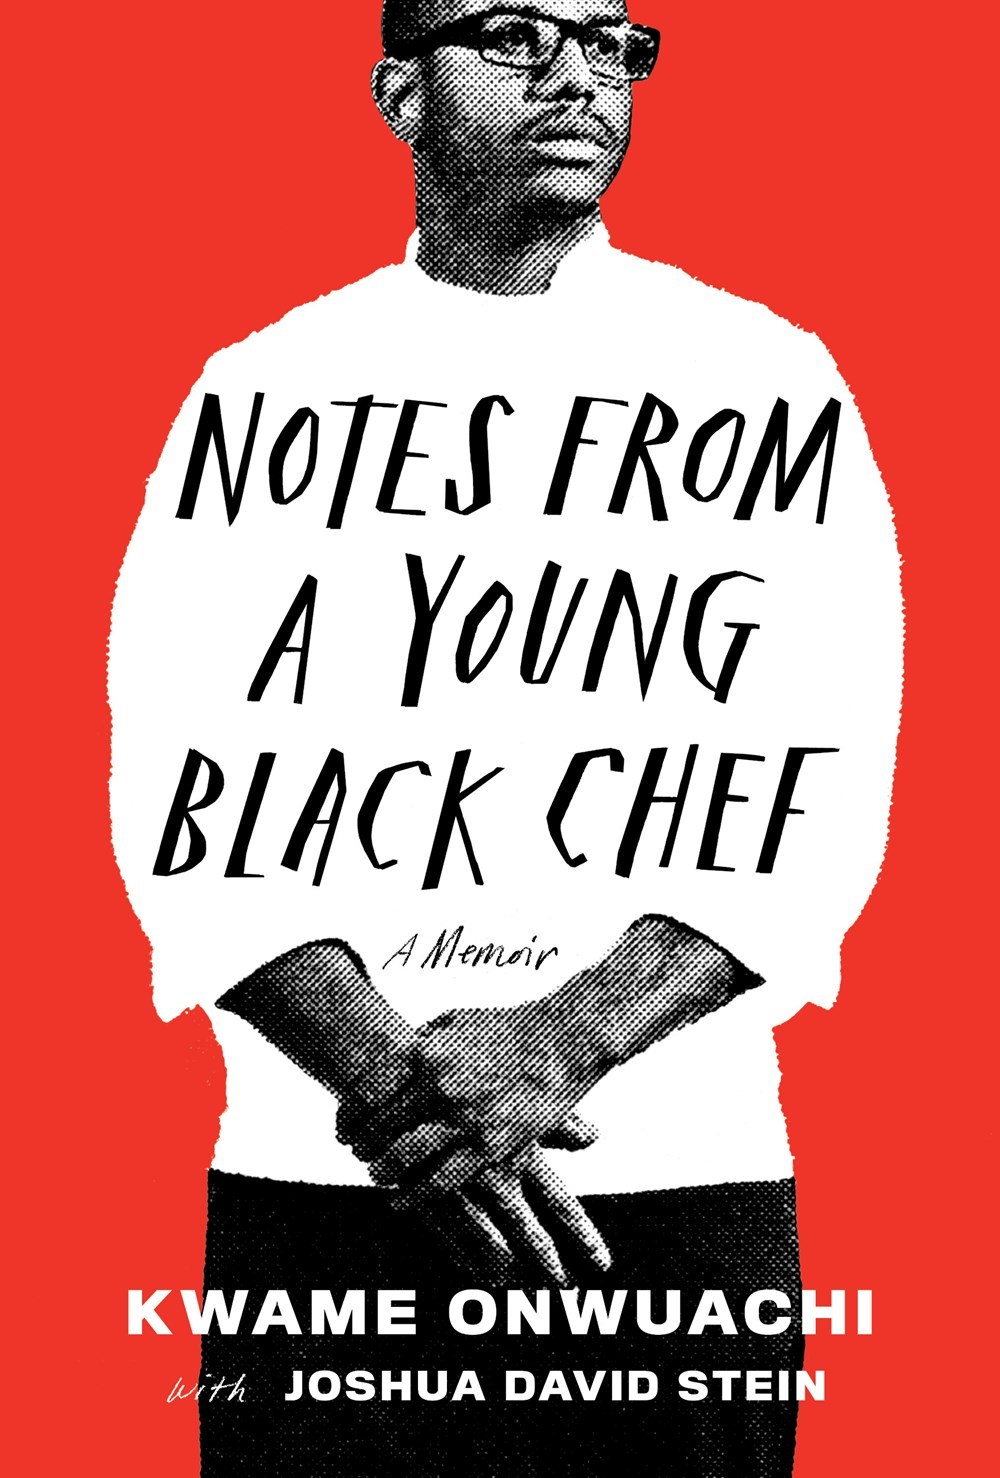 Notes from a Young Black Chef books